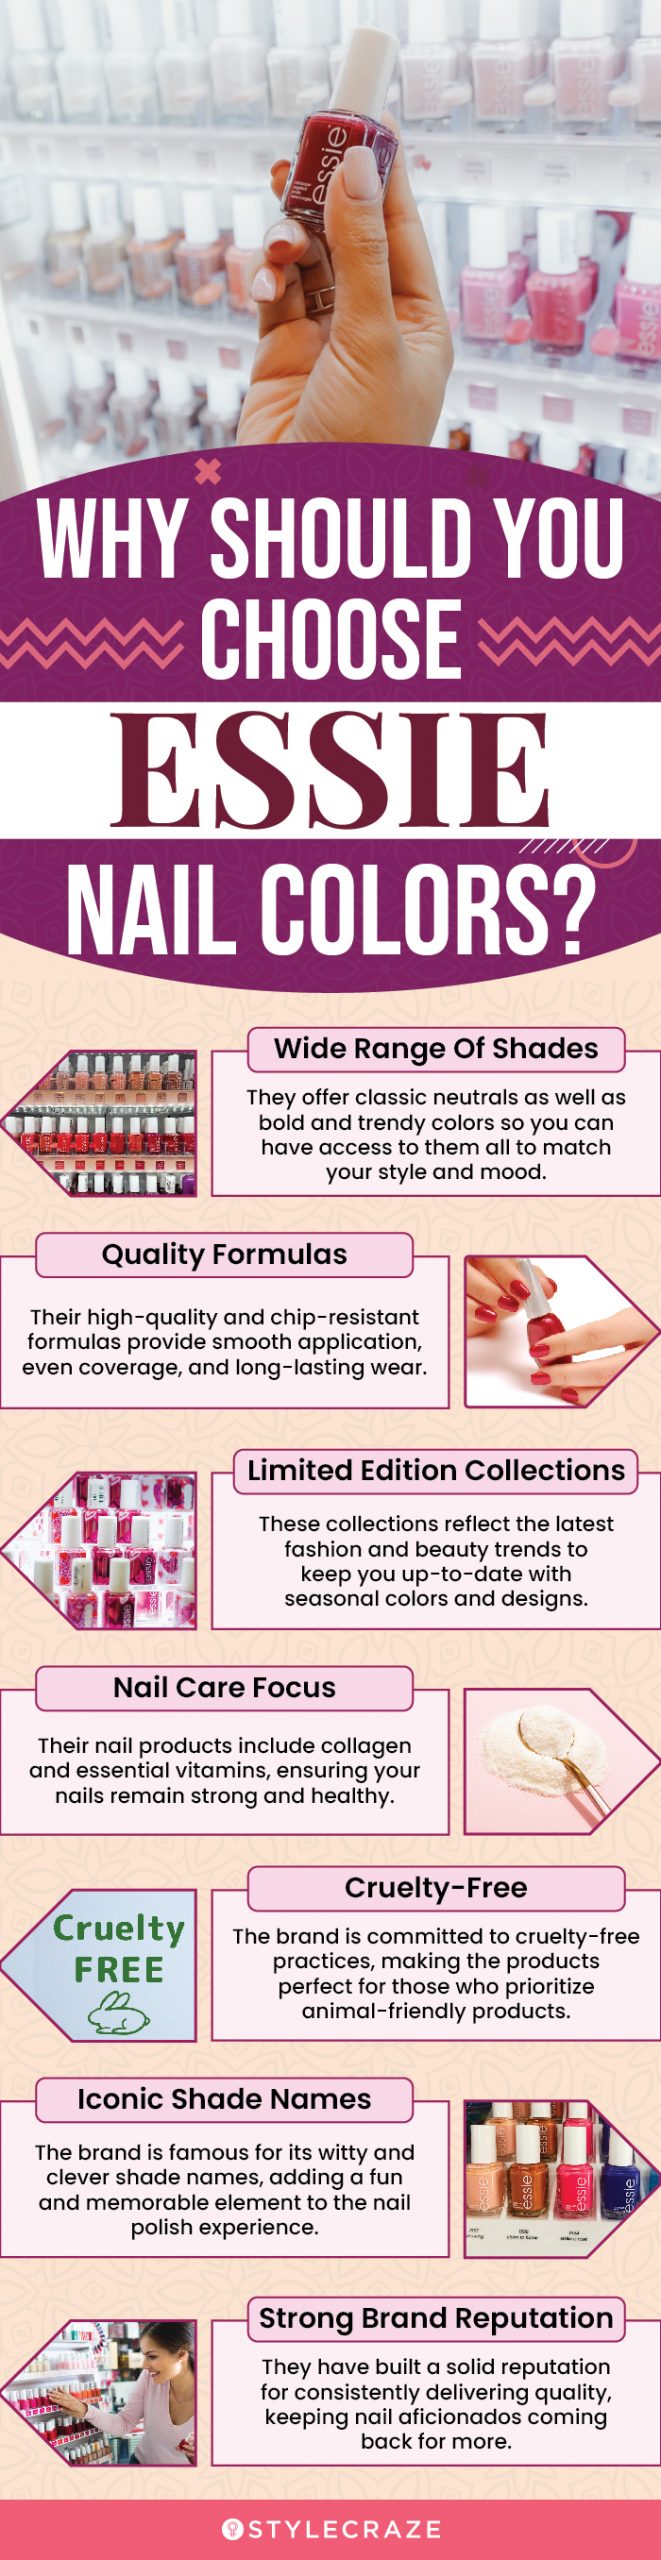 Why Should You Choose Essie Nail Colors? (infographic)